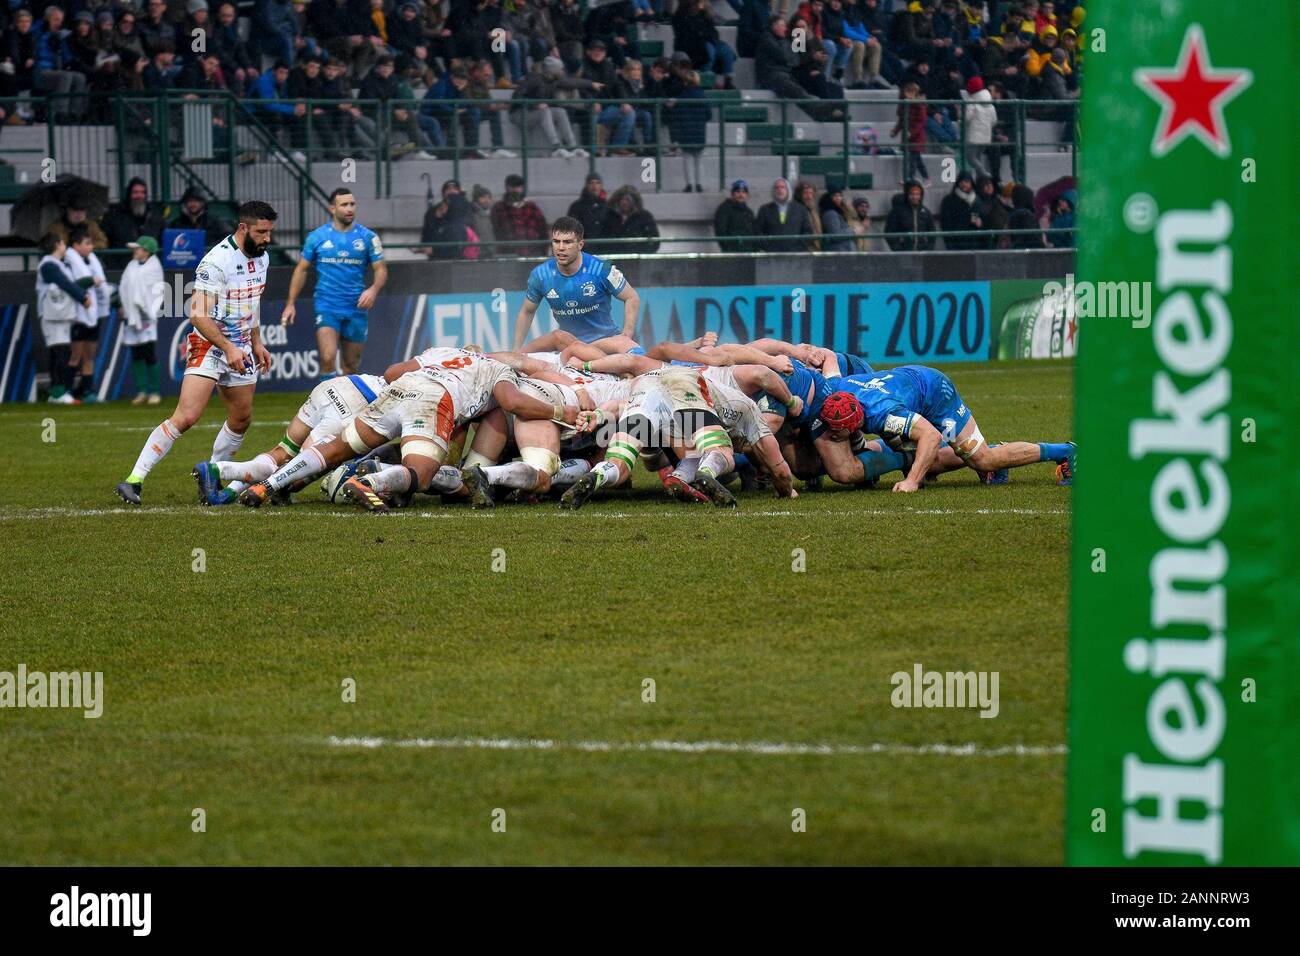 Treviso, Italy. 18th Jan, 2020. Treviso, Italy, 18 Jan 2020, scrum during Benetton Treviso vs Leinster Rugby - Rugby Heineken Champions Cup - Credit: LM/Ettore Griffoni Credit: Ettore Griffoni/LPS/ZUMA Wire/Alamy Live News Stock Photo